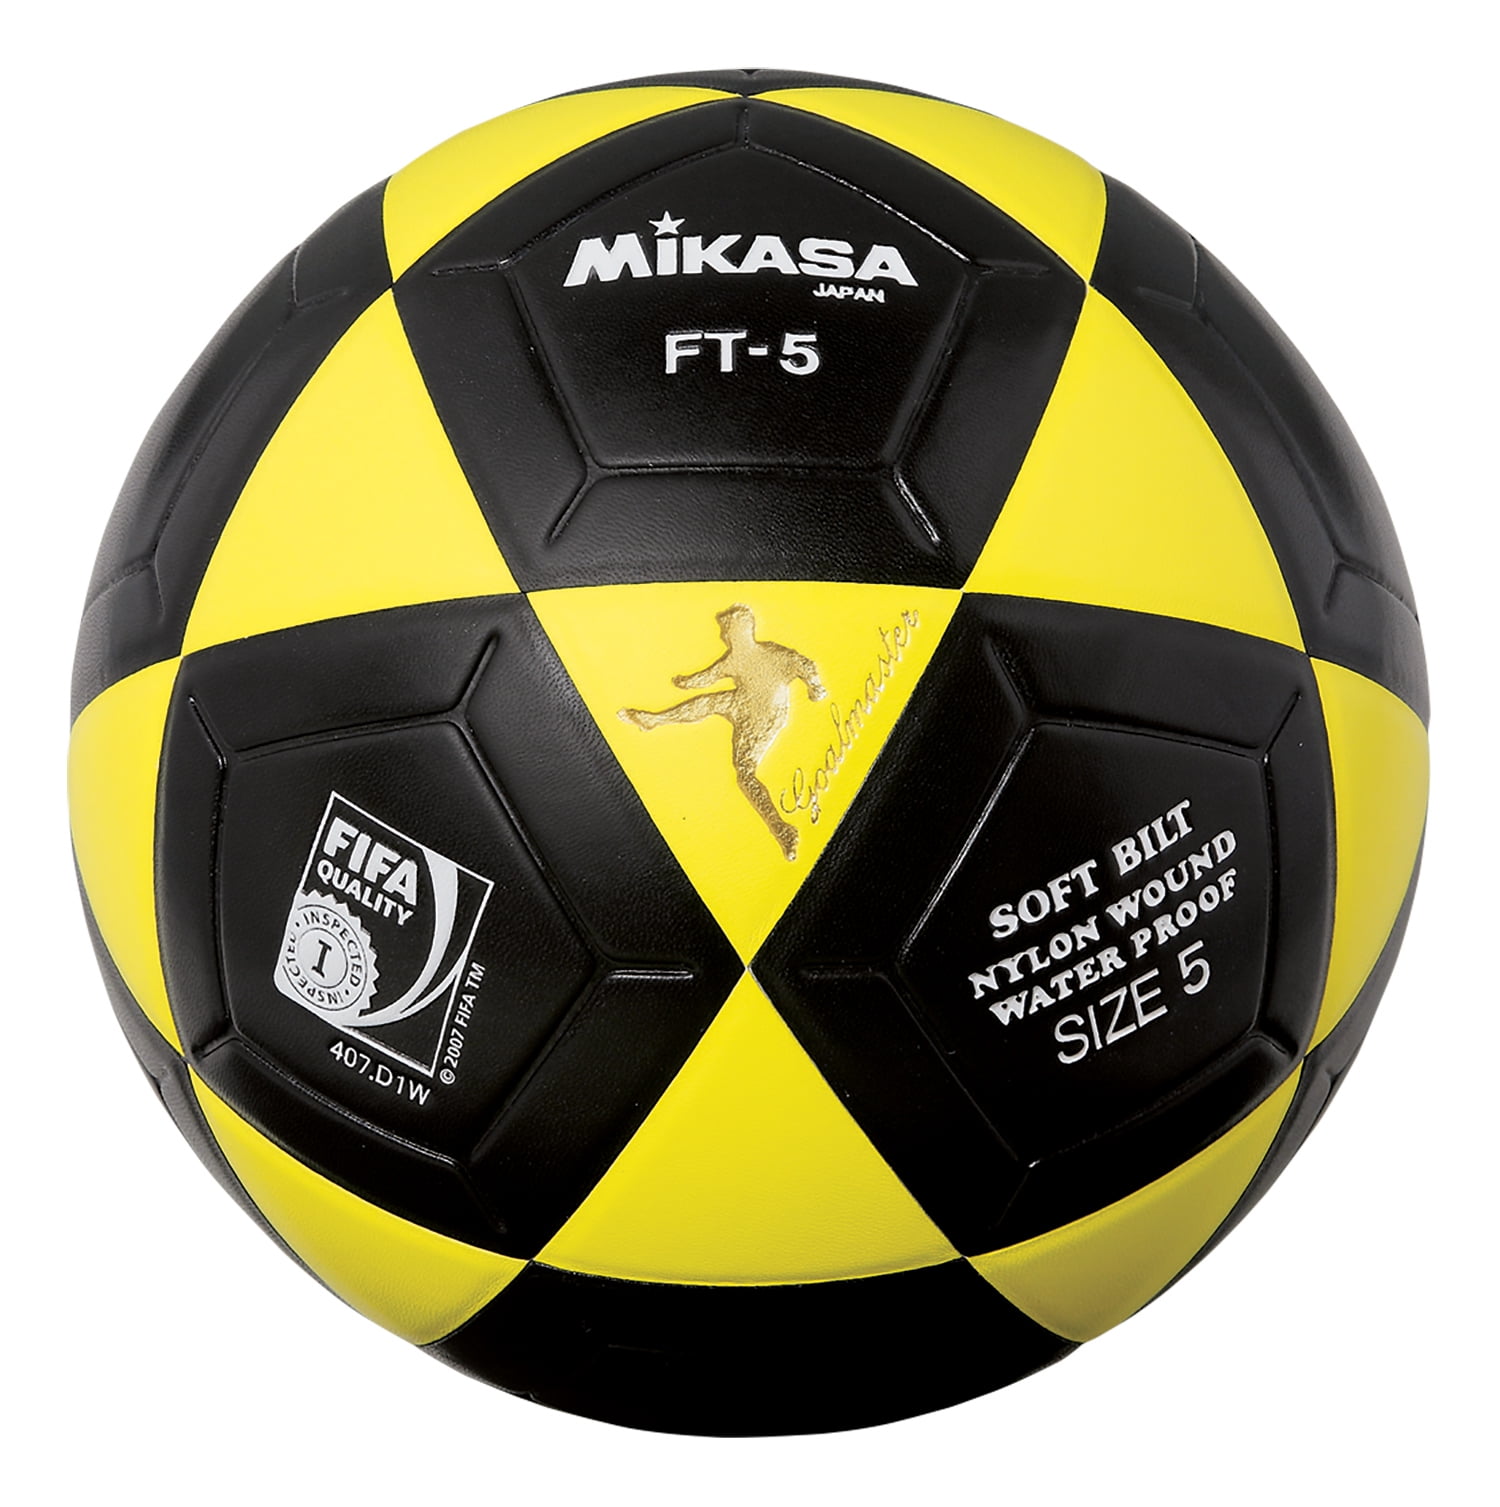 Mikasa FT5 Goal Master Soccer Ball Size 5 Black/Yellow Official Footvolley Ball 